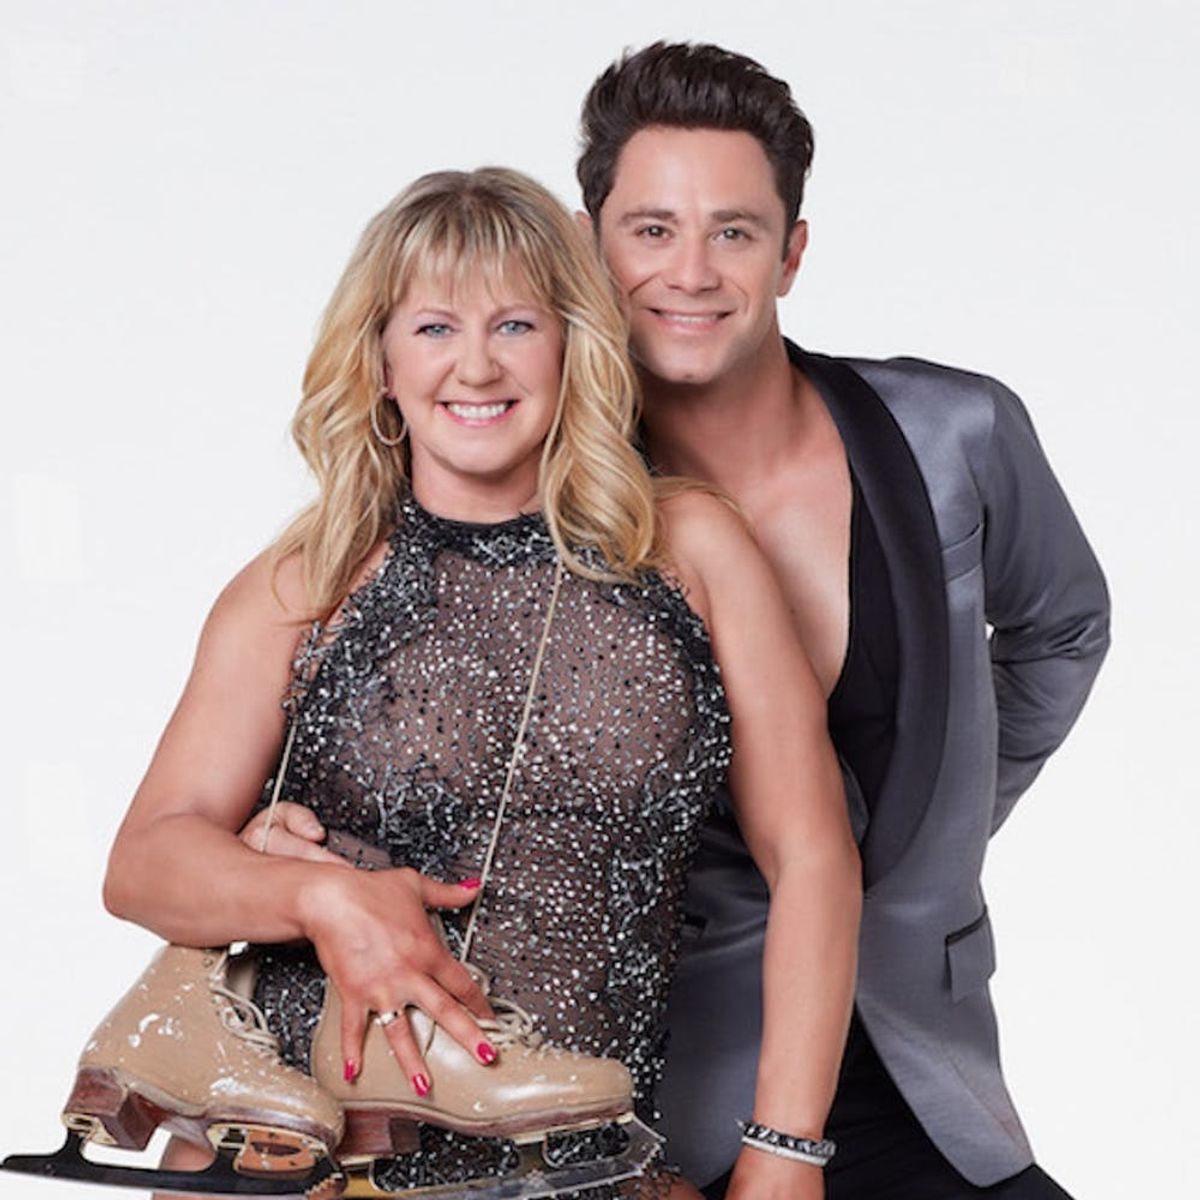 ‘Dancing With the Stars: Athletes’ Week 3 Recap: Who Made the Finals?